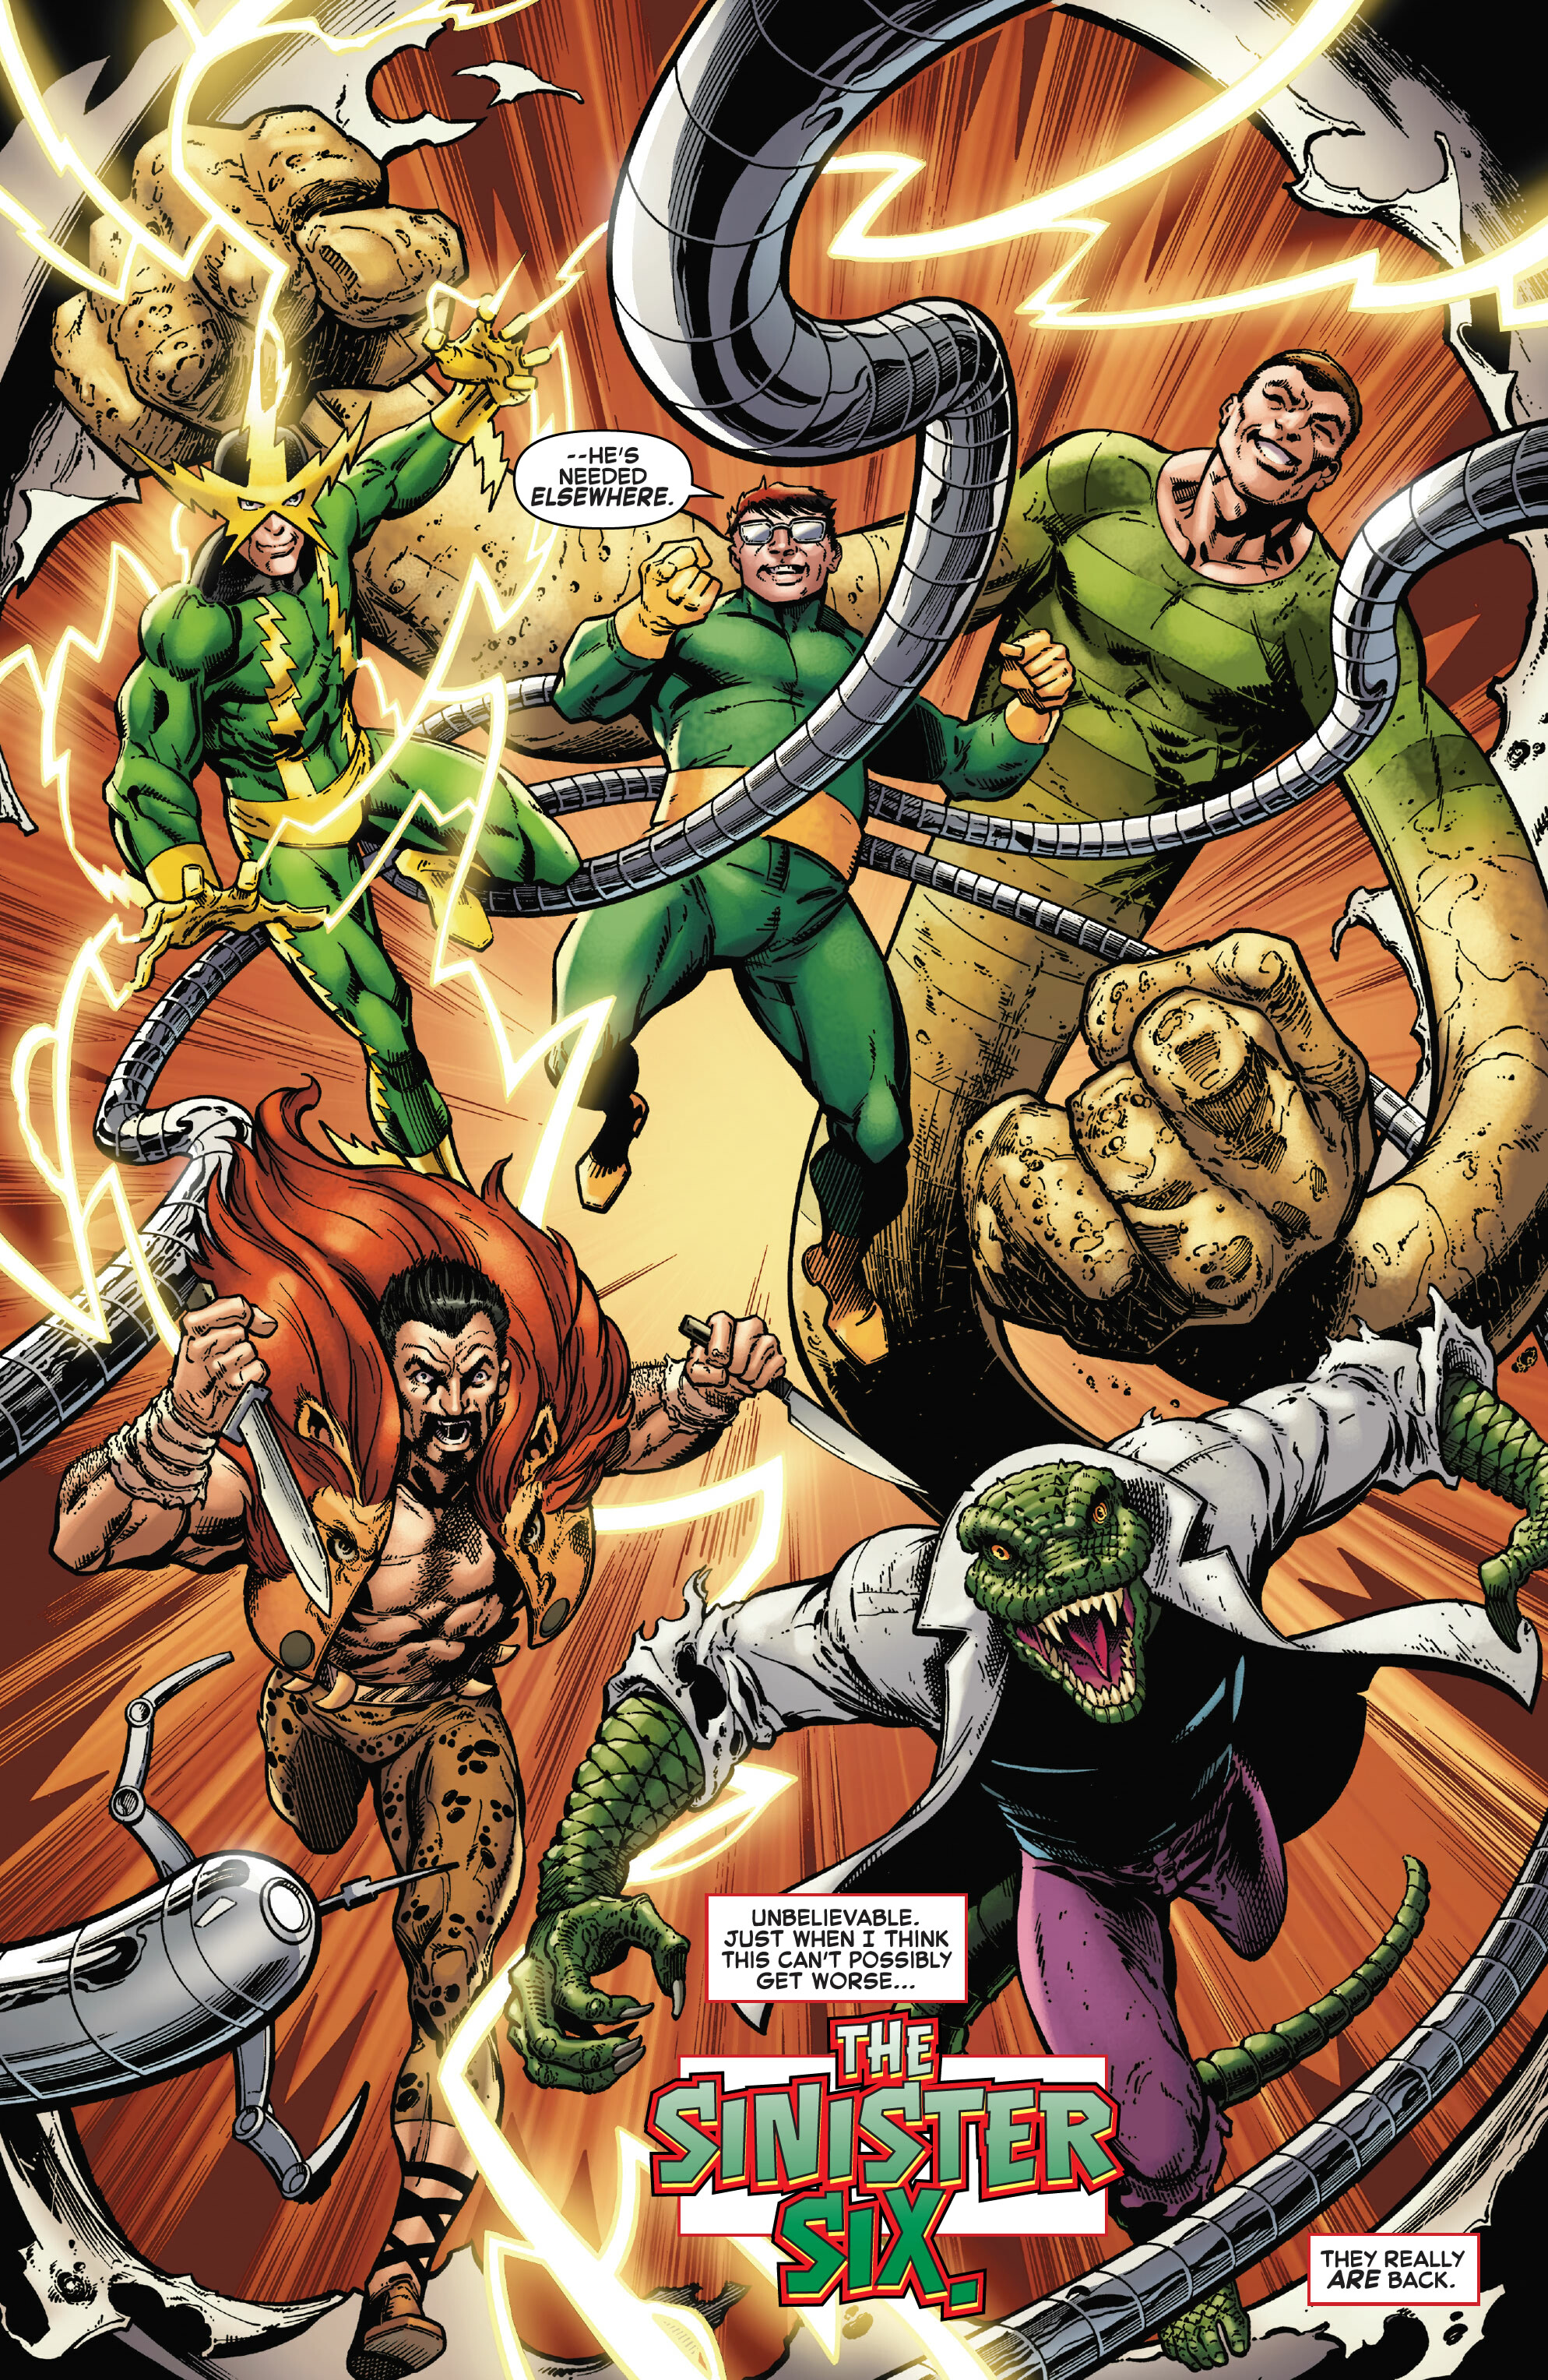 Sinister Six screenshots, image and picture